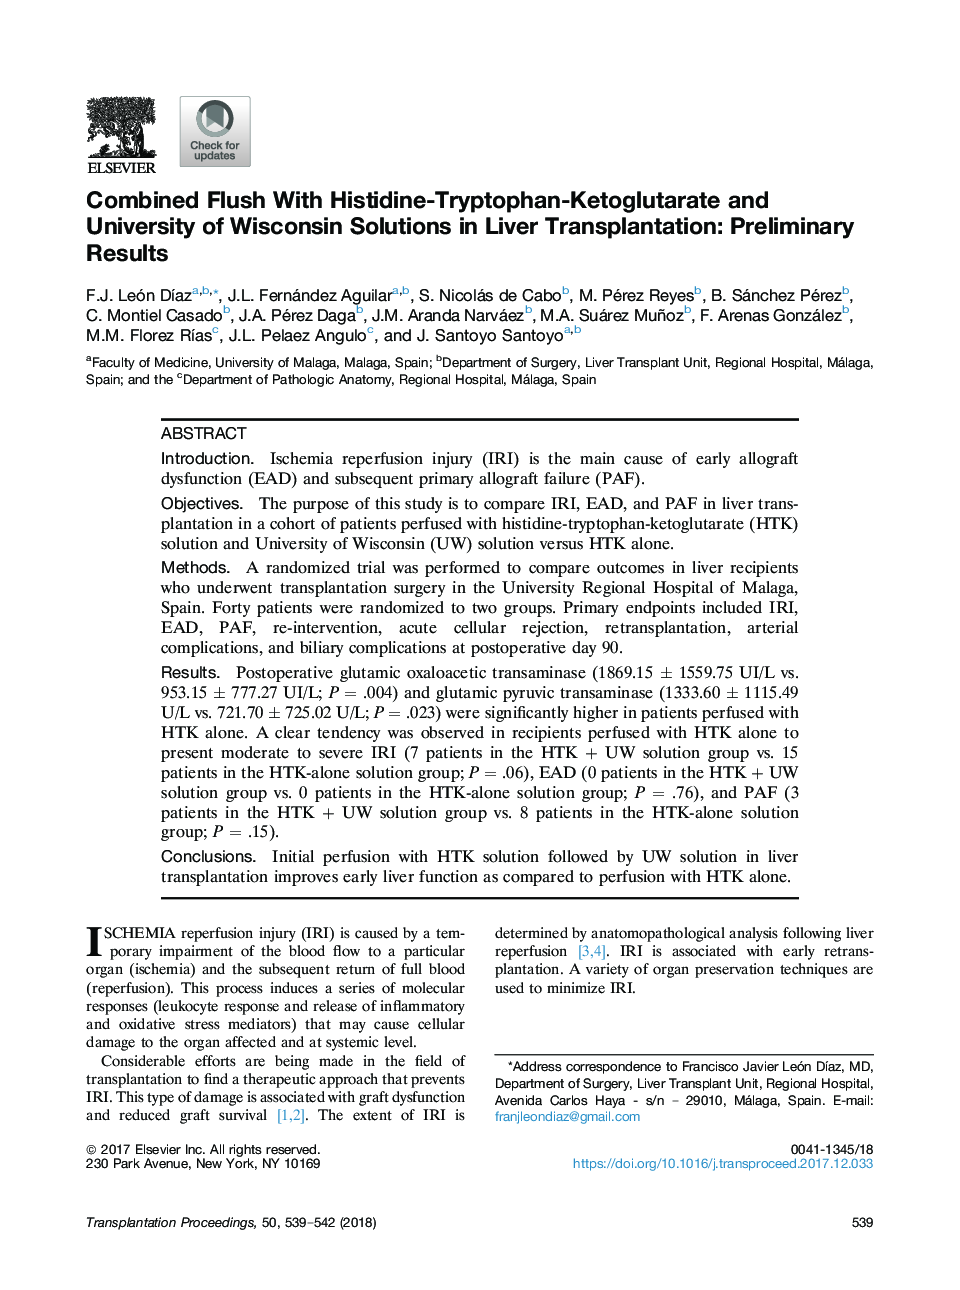 Combined Flush With Histidine-Tryptophan-Ketoglutarate and University of Wisconsin Solutions in Liver Transplantation: Preliminary Results